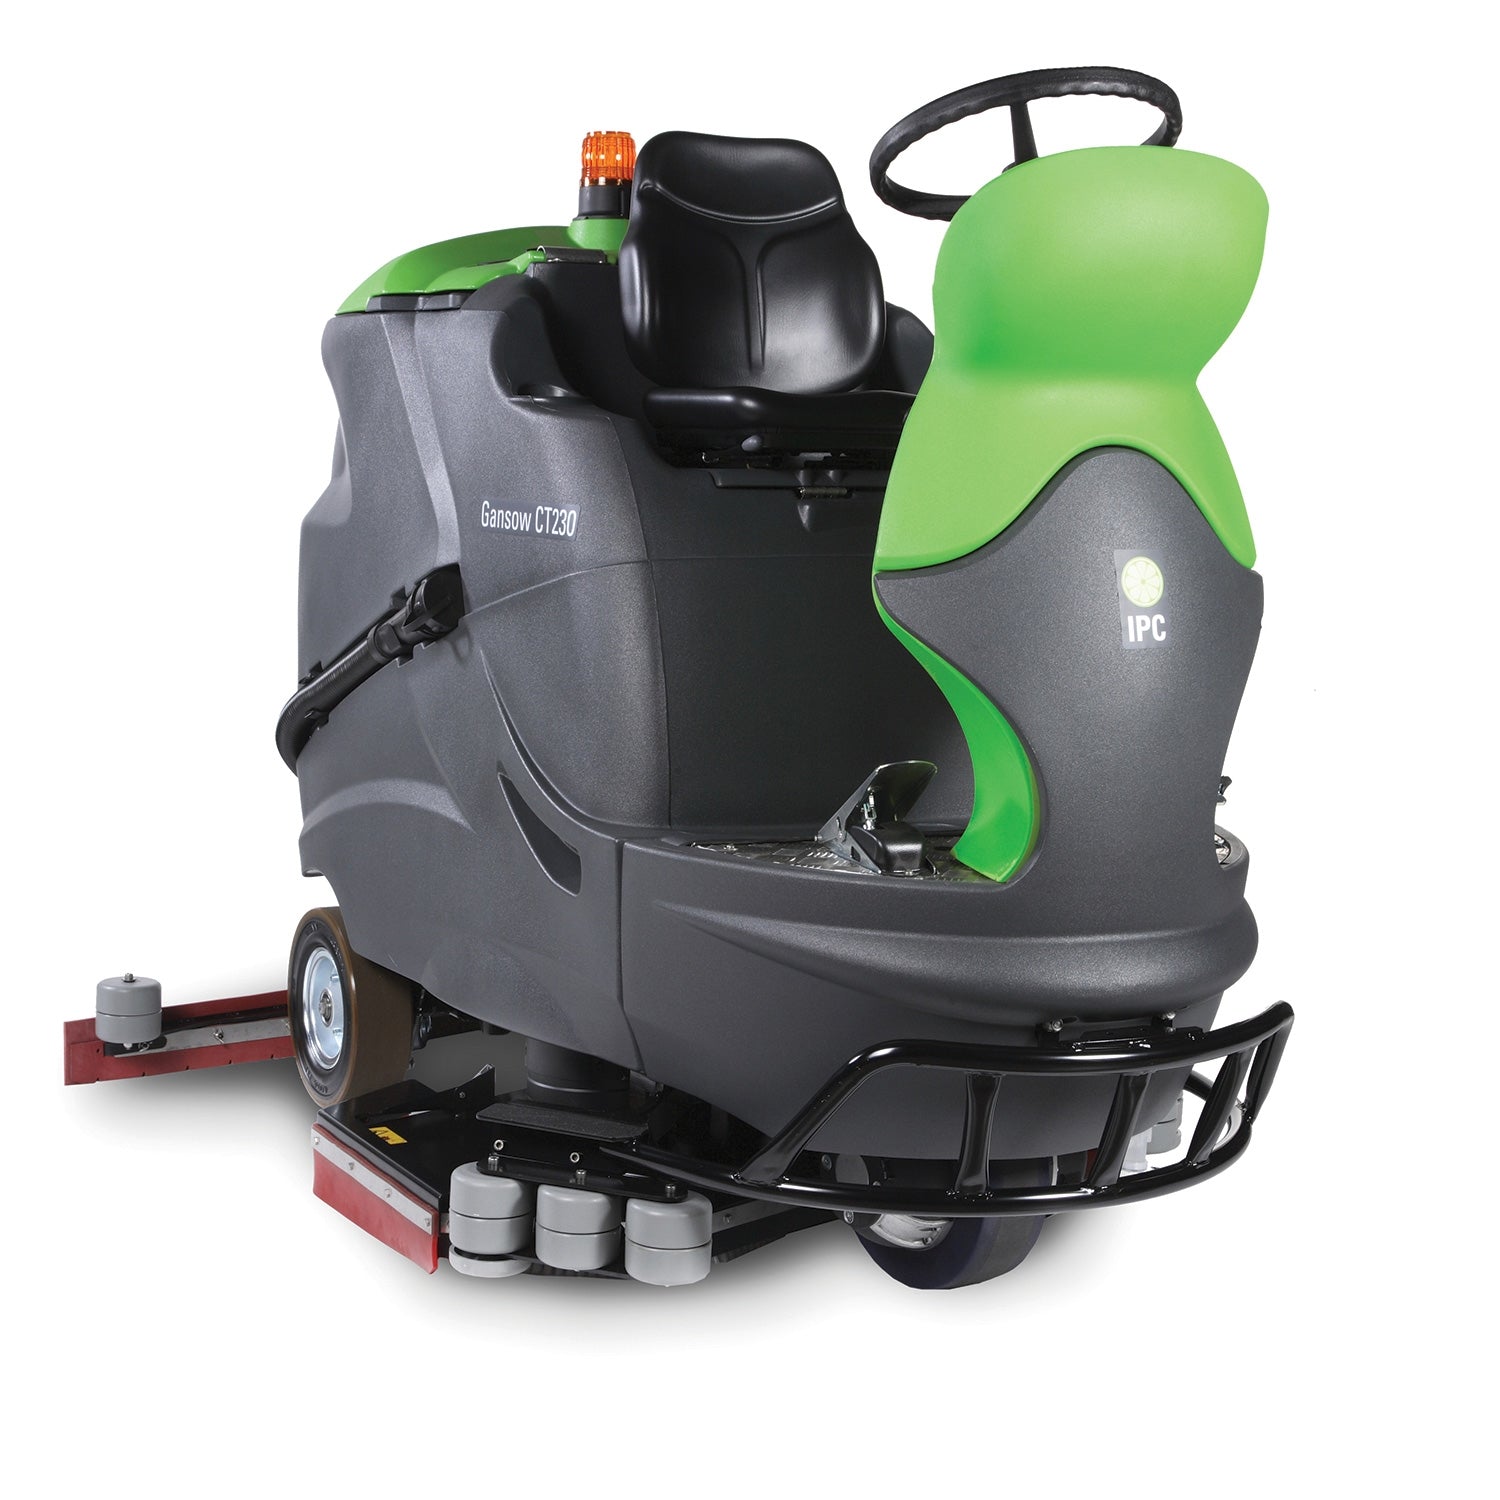 IPC Eagle CT230BT105(B)-330 42" Automatic Rider Scrubber with 330 Ah AGM Batteries and Brushes